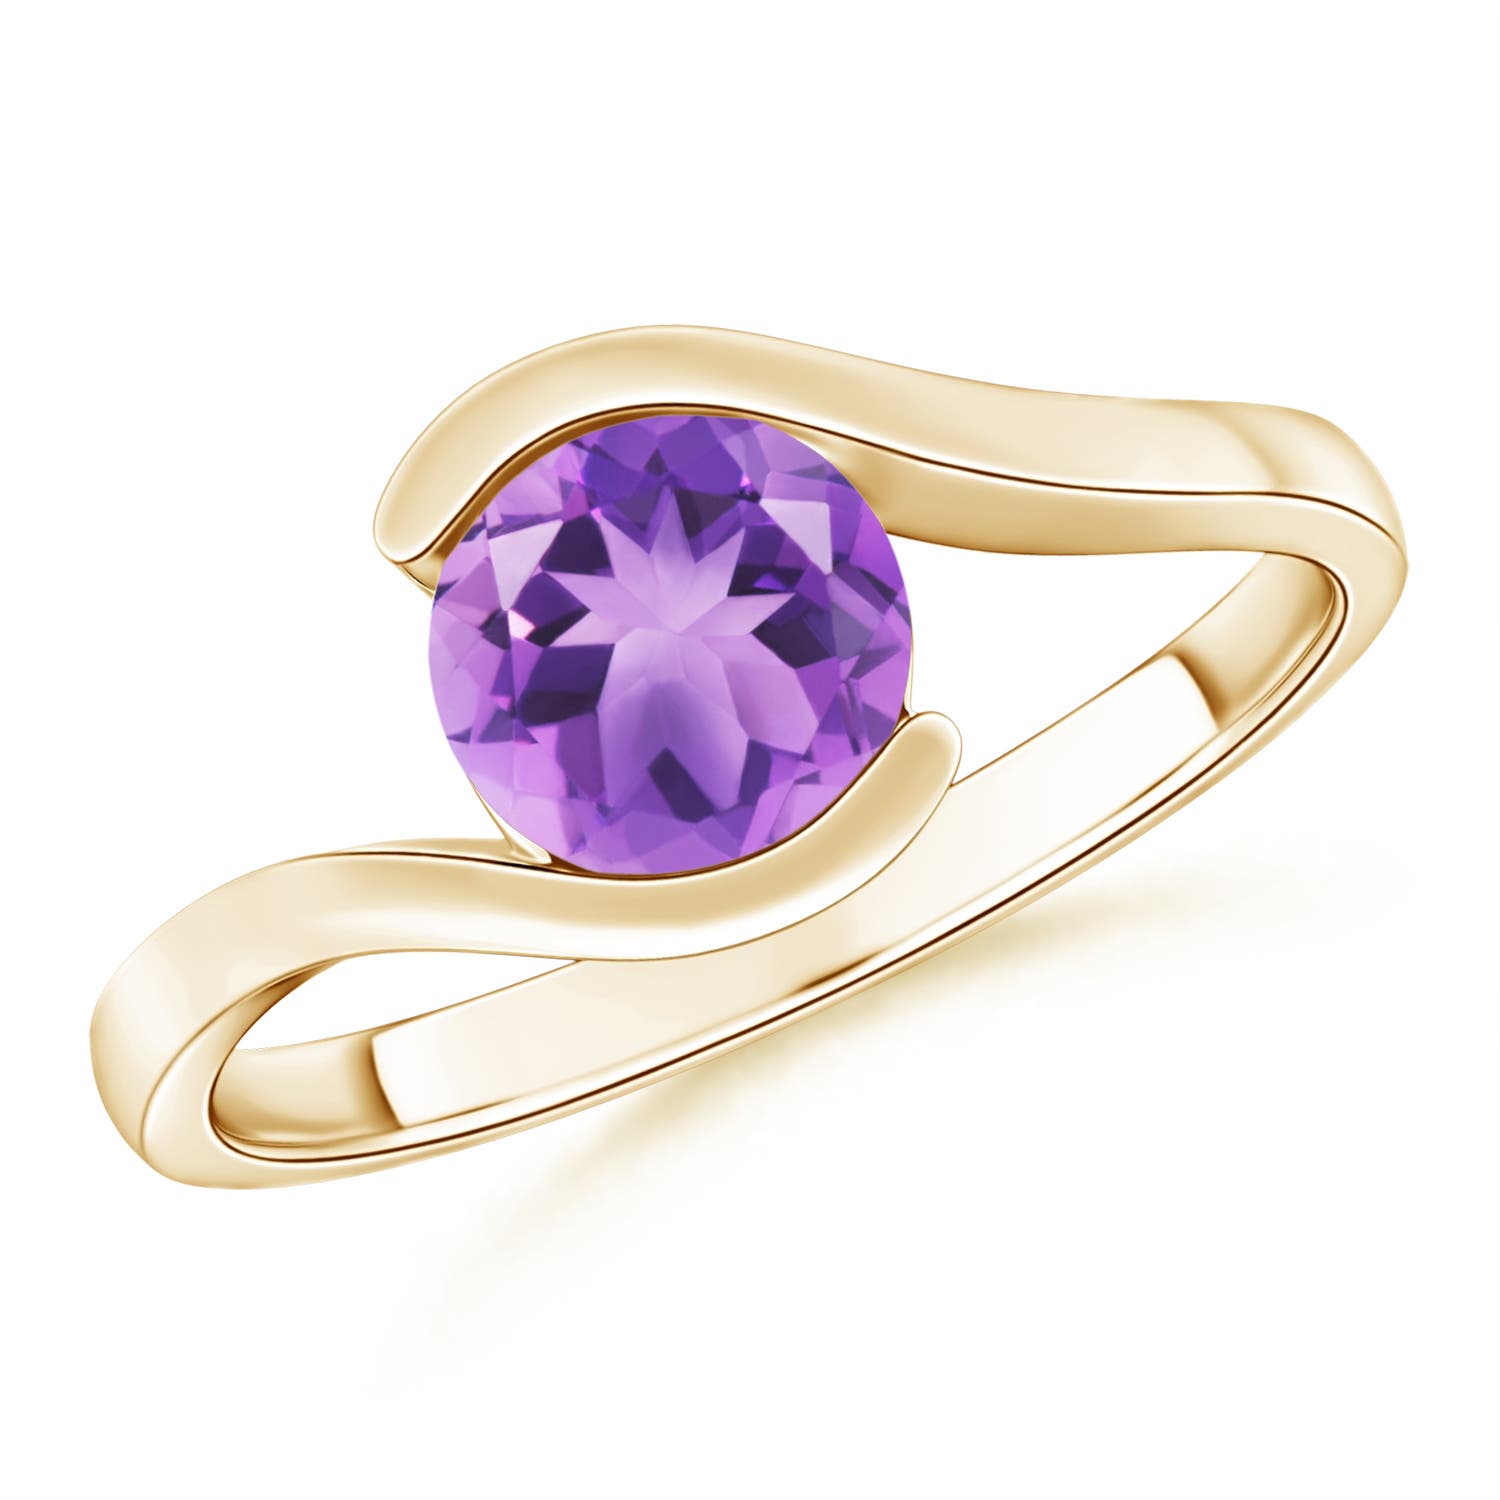 A - Amethyst / 1.15 CT / 14 KT Yellow Gold